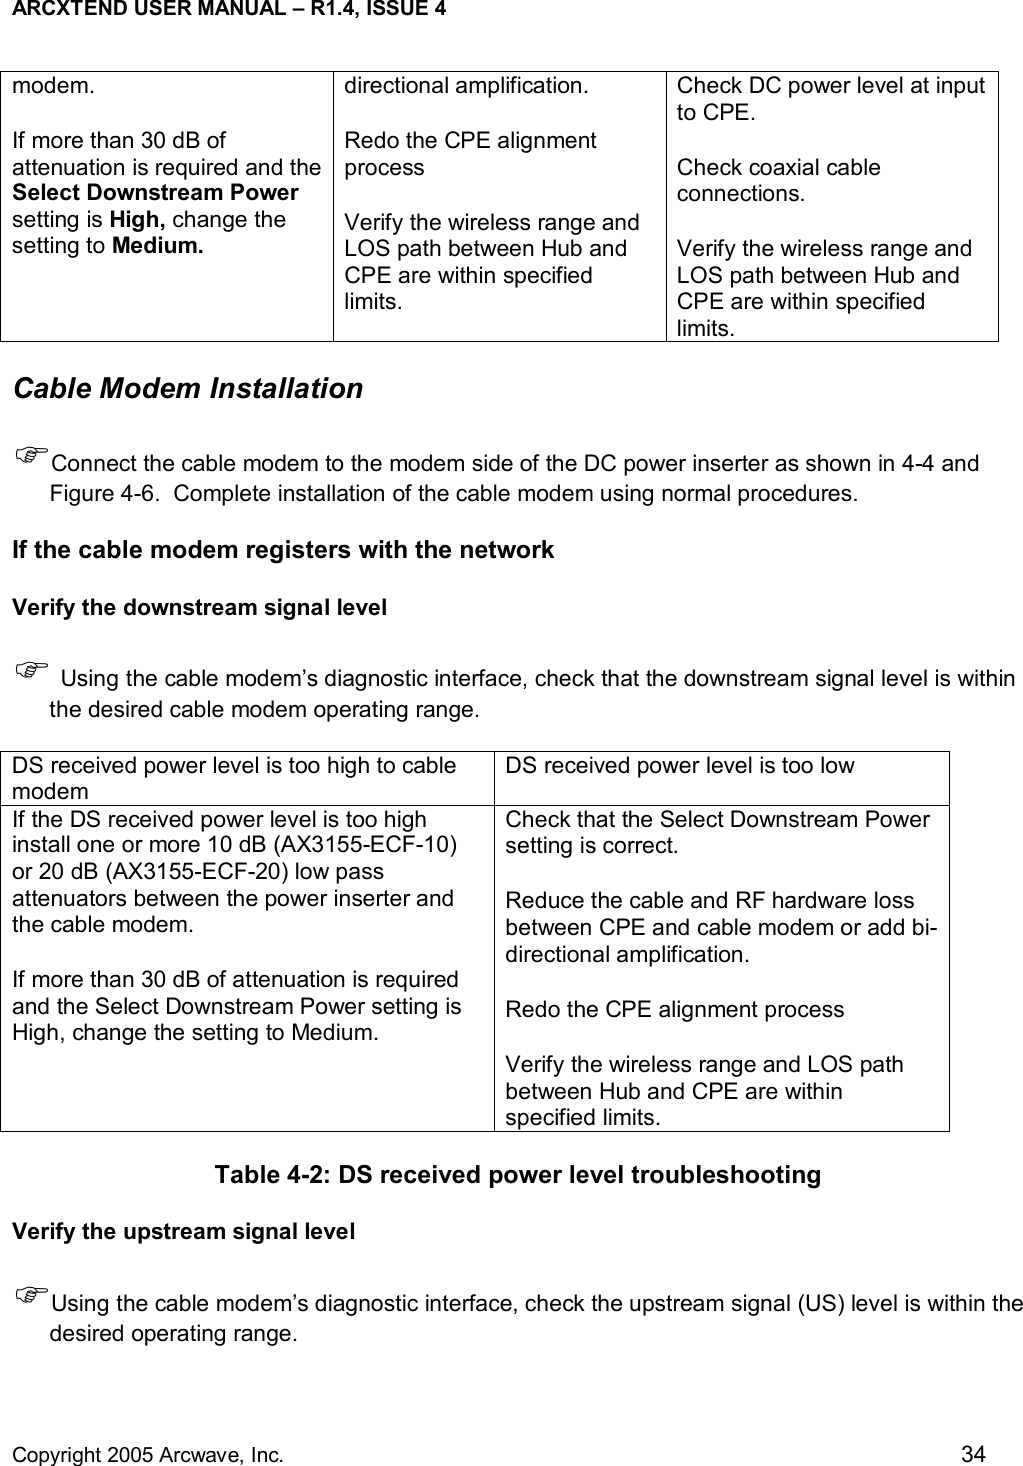 ARCXTEND USER MANUAL – R1.4, ISSUE 4  Copyright 2005 Arcwave, Inc.    34 modem.  If more than 30 dB of attenuation is required and the Select Downstream Power setting is High, change the setting to Medium.  directional amplification.  Redo the CPE alignment process Verify the wireless range and LOS path between Hub and CPE are within specified limits. Check DC power level at input to CPE.  Check coaxial cable connections.  Verify the wireless range and LOS path between Hub and CPE are within specified limits. Cable Modem Installation )Connect the cable modem to the modem side of the DC power inserter as shown in 4-4 and Figure 4-6.  Complete installation of the cable modem using normal procedures.  If the cable modem registers with the network Verify the downstream signal level ) Using the cable modem’s diagnostic interface, check that the downstream signal level is within the desired cable modem operating range.  DS received power level is too high to cable modem DS received power level is too low If the DS received power level is too high install one or more 10 dB (AX3155-ECF-10) or 20 dB (AX3155-ECF-20) low pass attenuators between the power inserter and the cable modem.  If more than 30 dB of attenuation is required and the Select Downstream Power setting is High, change the setting to Medium. Check that the Select Downstream Power setting is correct. Reduce the cable and RF hardware loss between CPE and cable modem or add bi-directional amplification.  Redo the CPE alignment process Verify the wireless range and LOS path between Hub and CPE are within specified limits. Table 4-2: DS received power level troubleshooting Verify the upstream signal level )Using the cable modem’s diagnostic interface, check the upstream signal (US) level is within the desired operating range.  